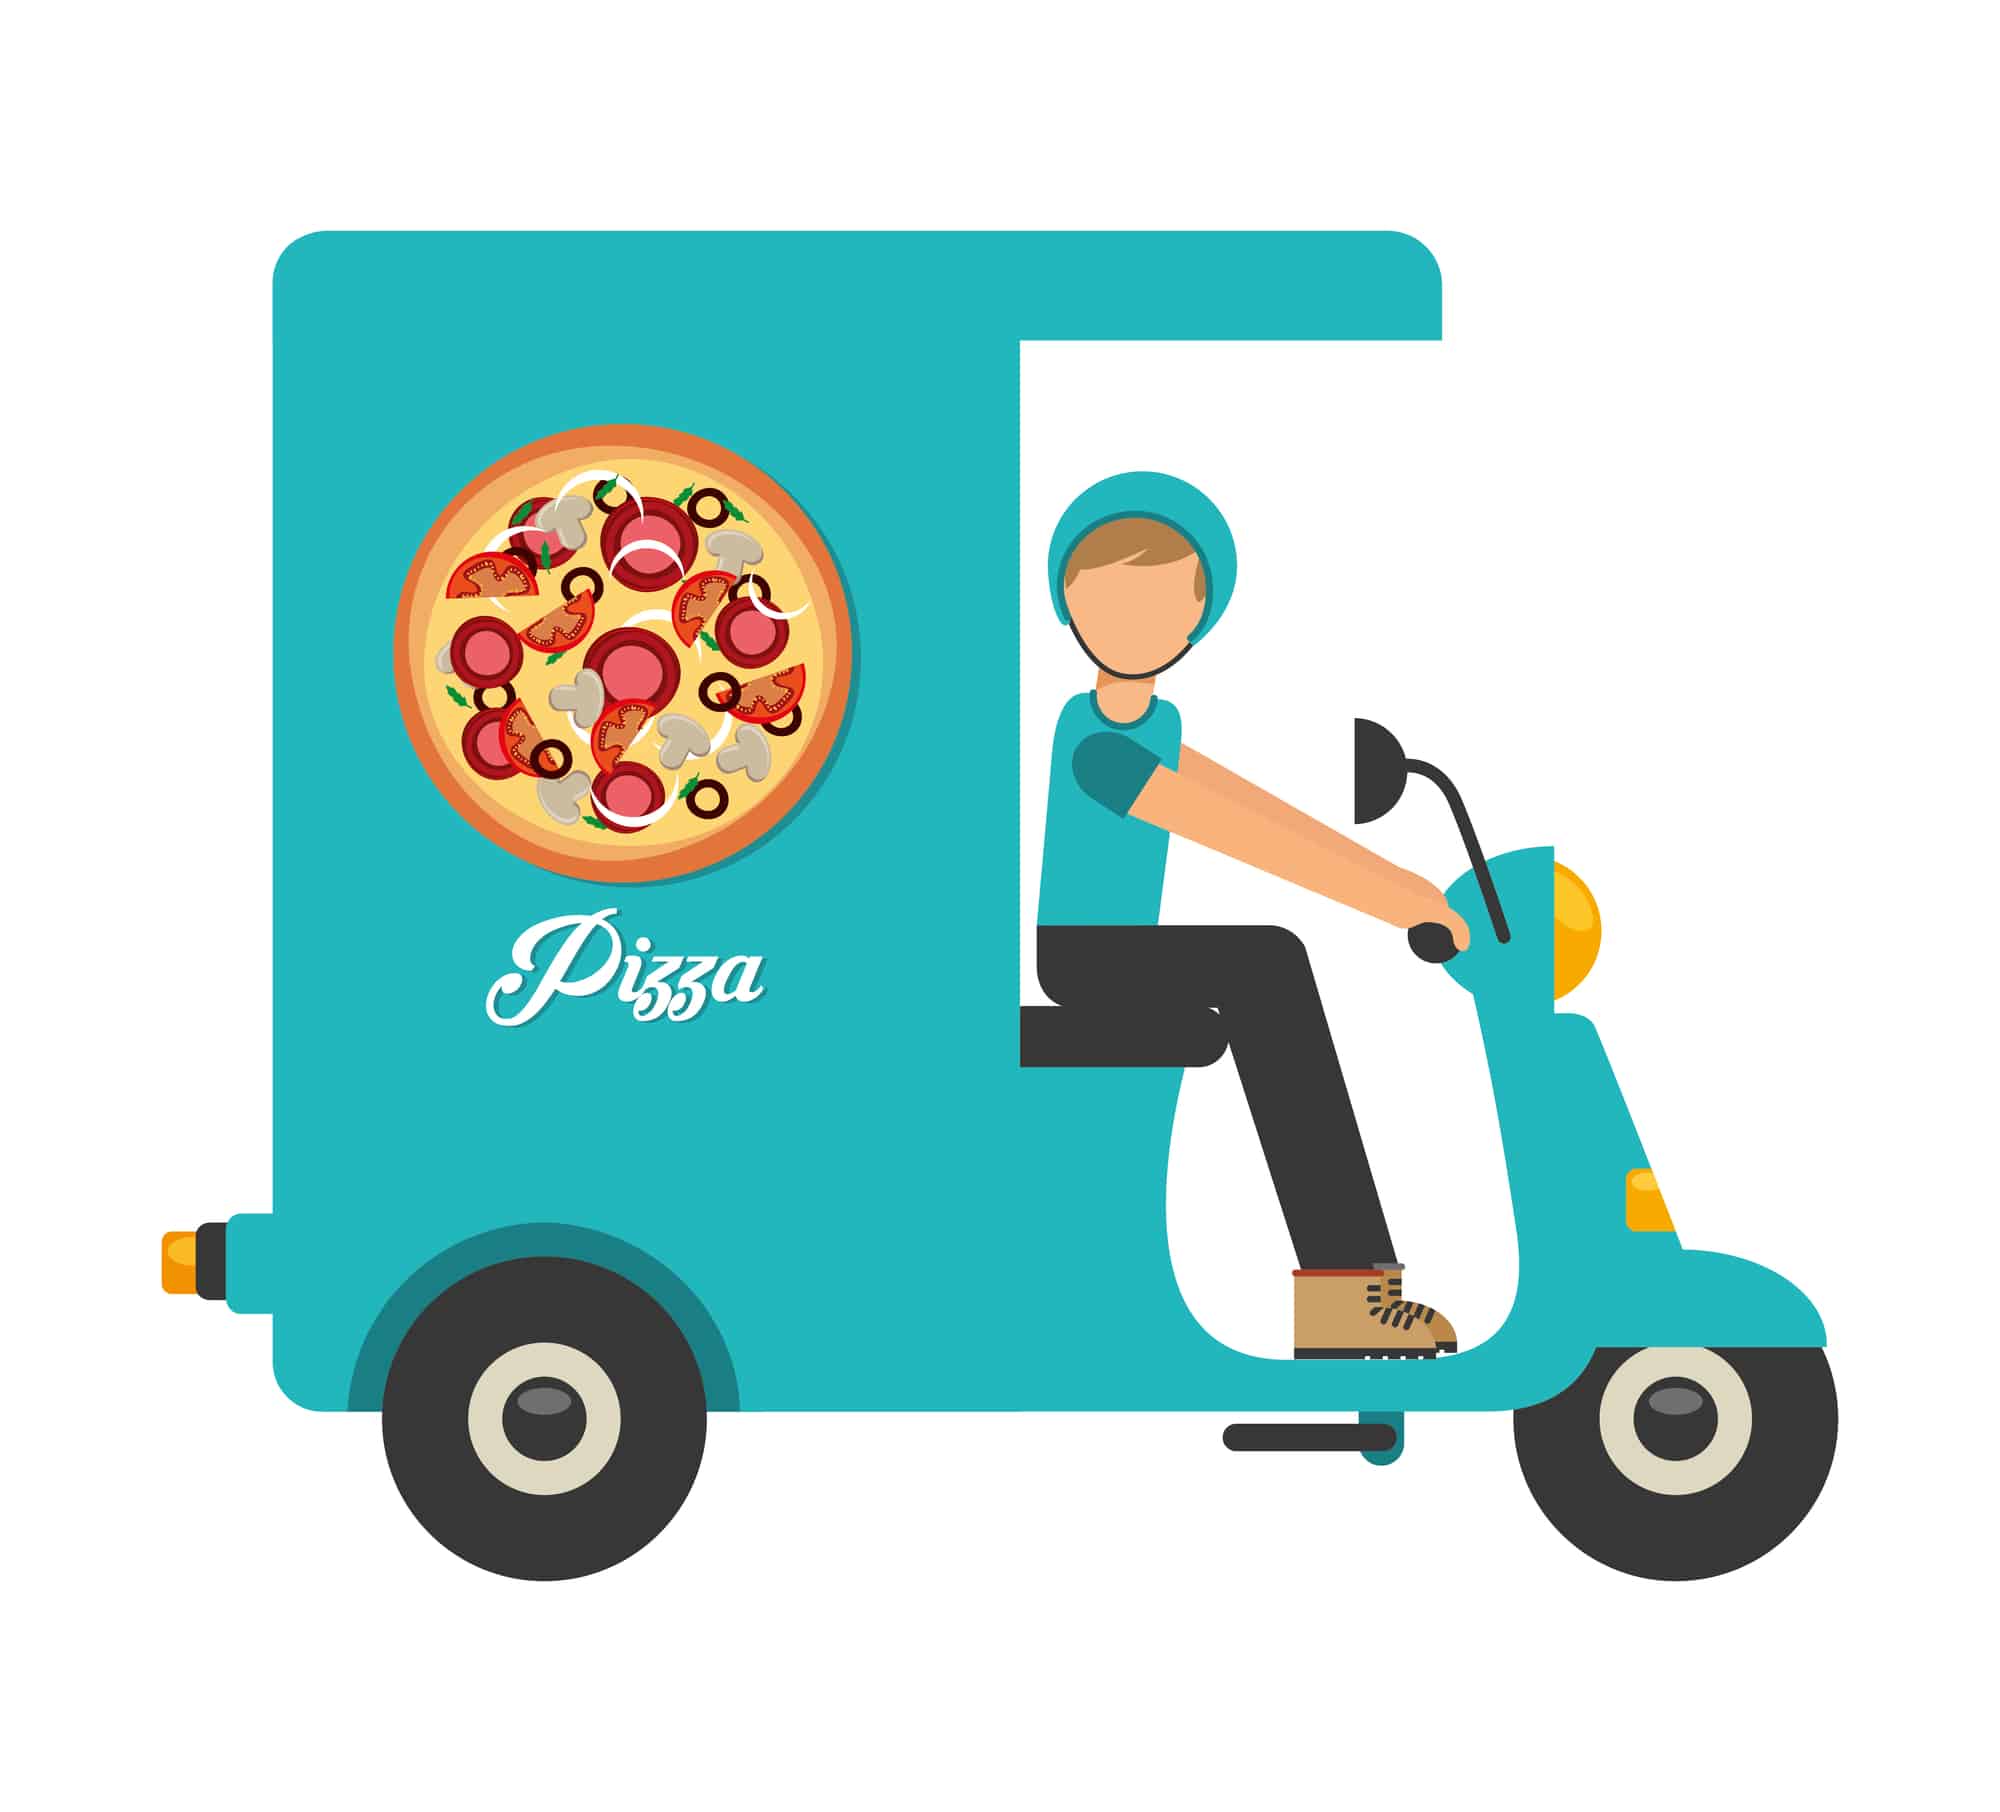 Pizza Delivery: Should You Charge?